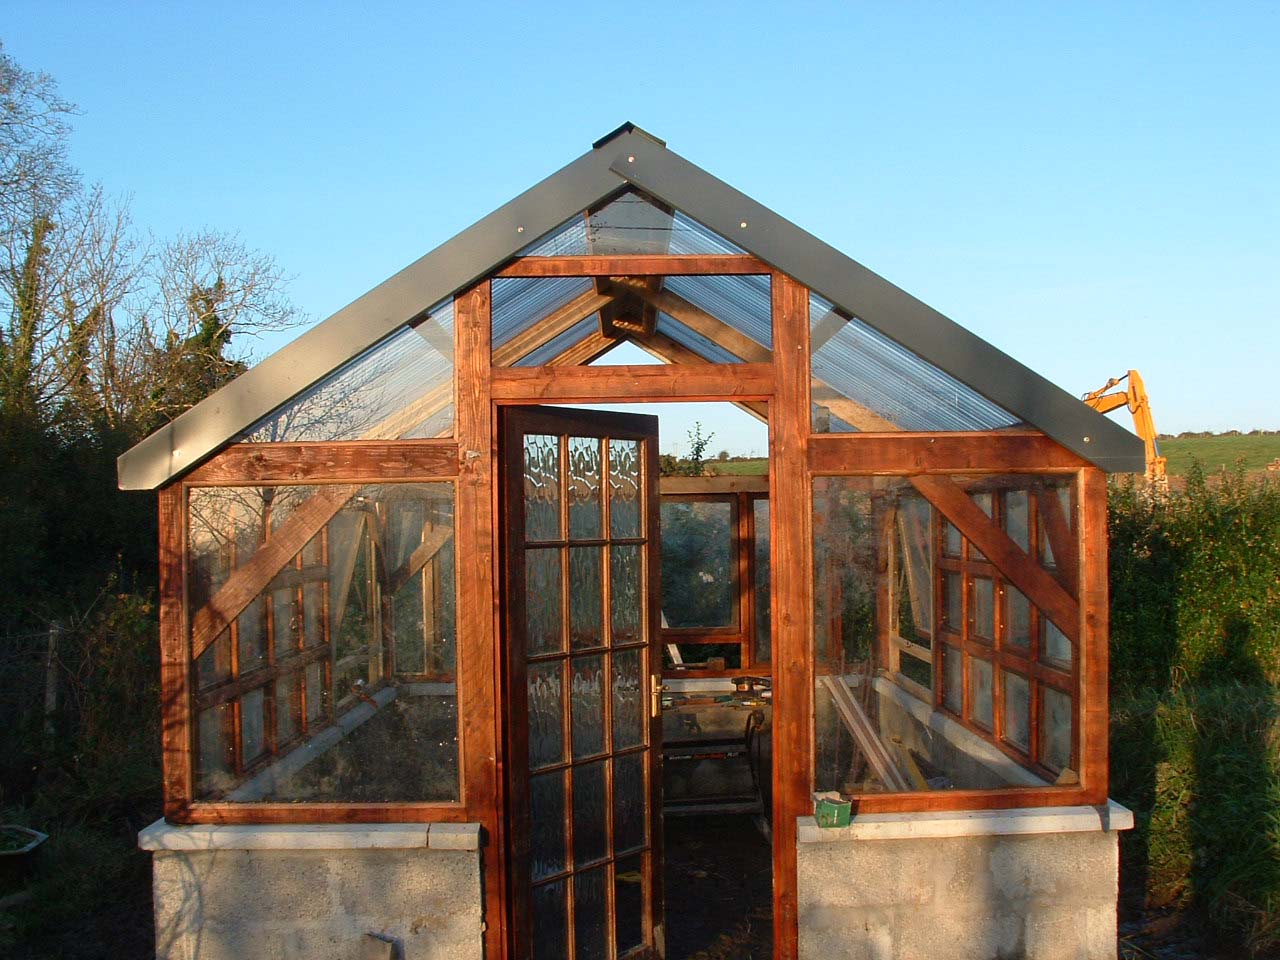 Wood Work » Timber frame Greenhouse w recycled windows